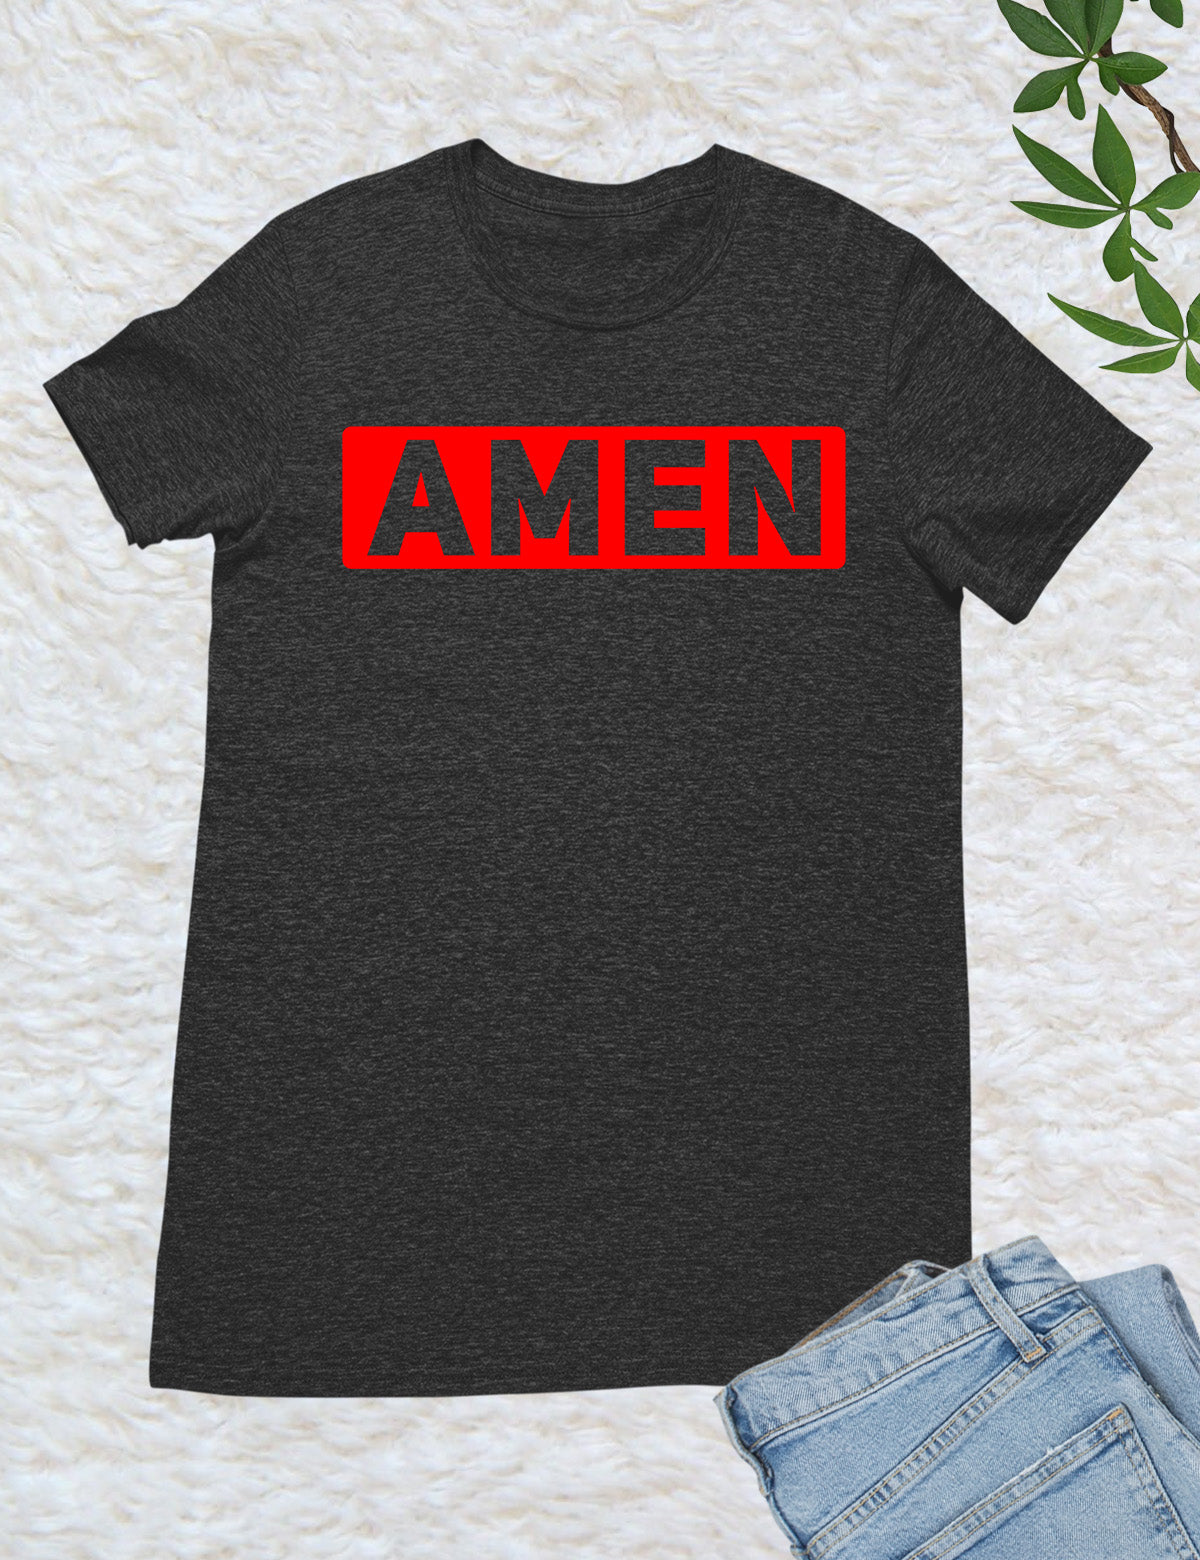 AMEN Religious Tees Let God's will Be Done